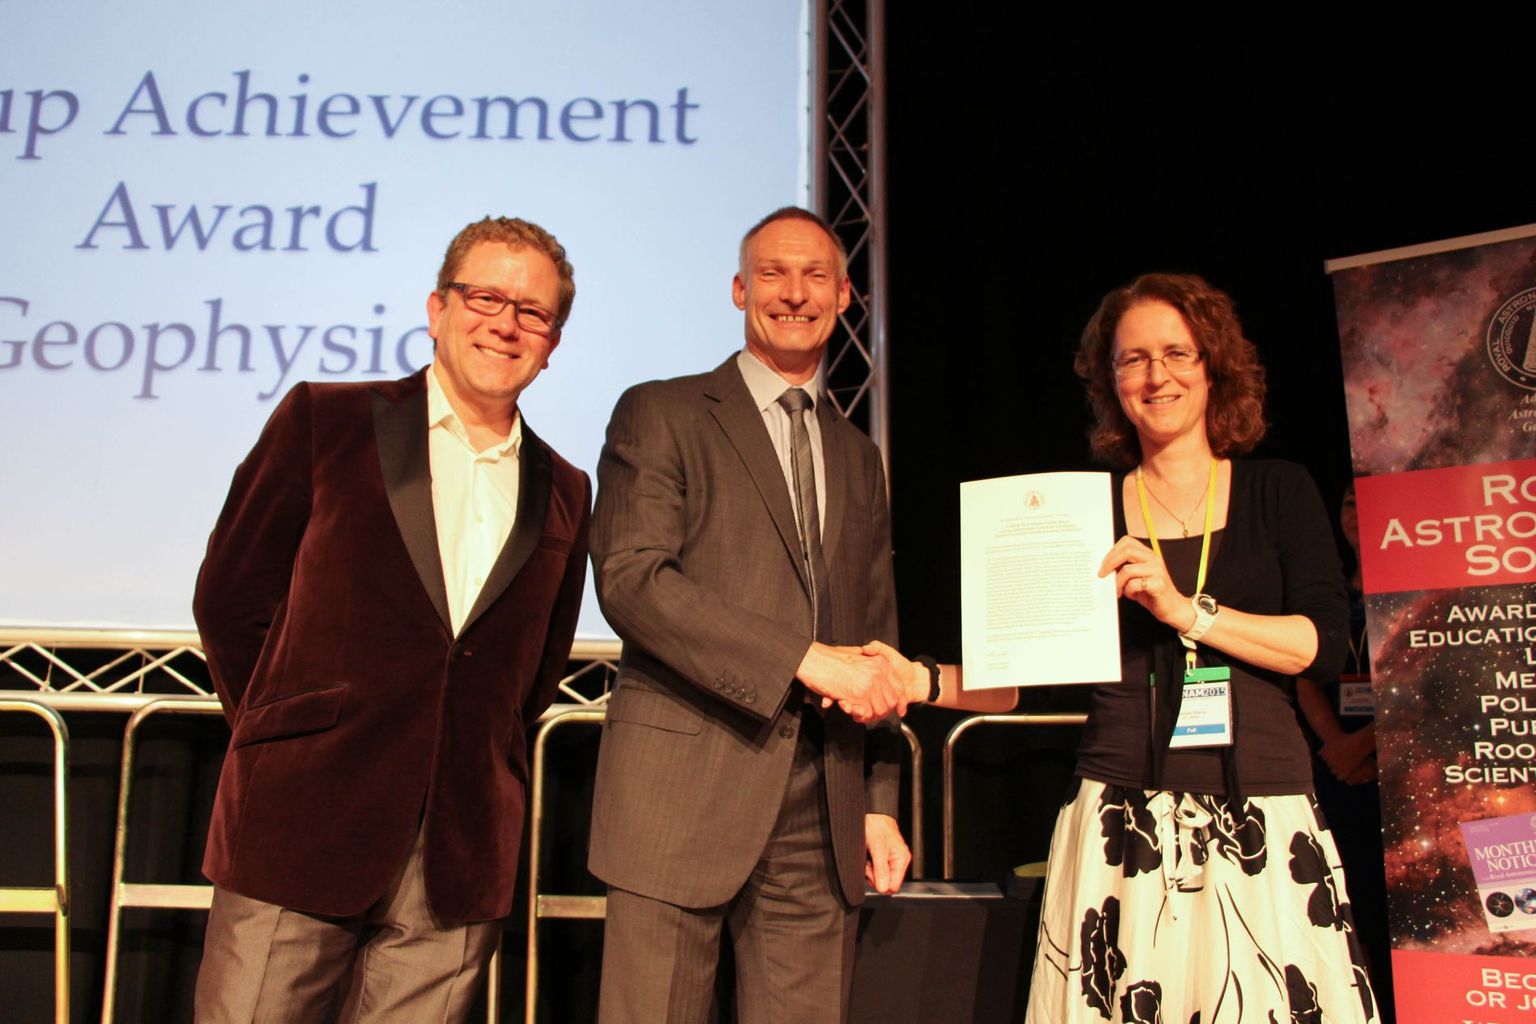 In 2015, Louise Harra received the Group Achievement Award in Geophysics as head of the Hinode Extreme Ultraviolet Imaging Spectrometer (EIS).